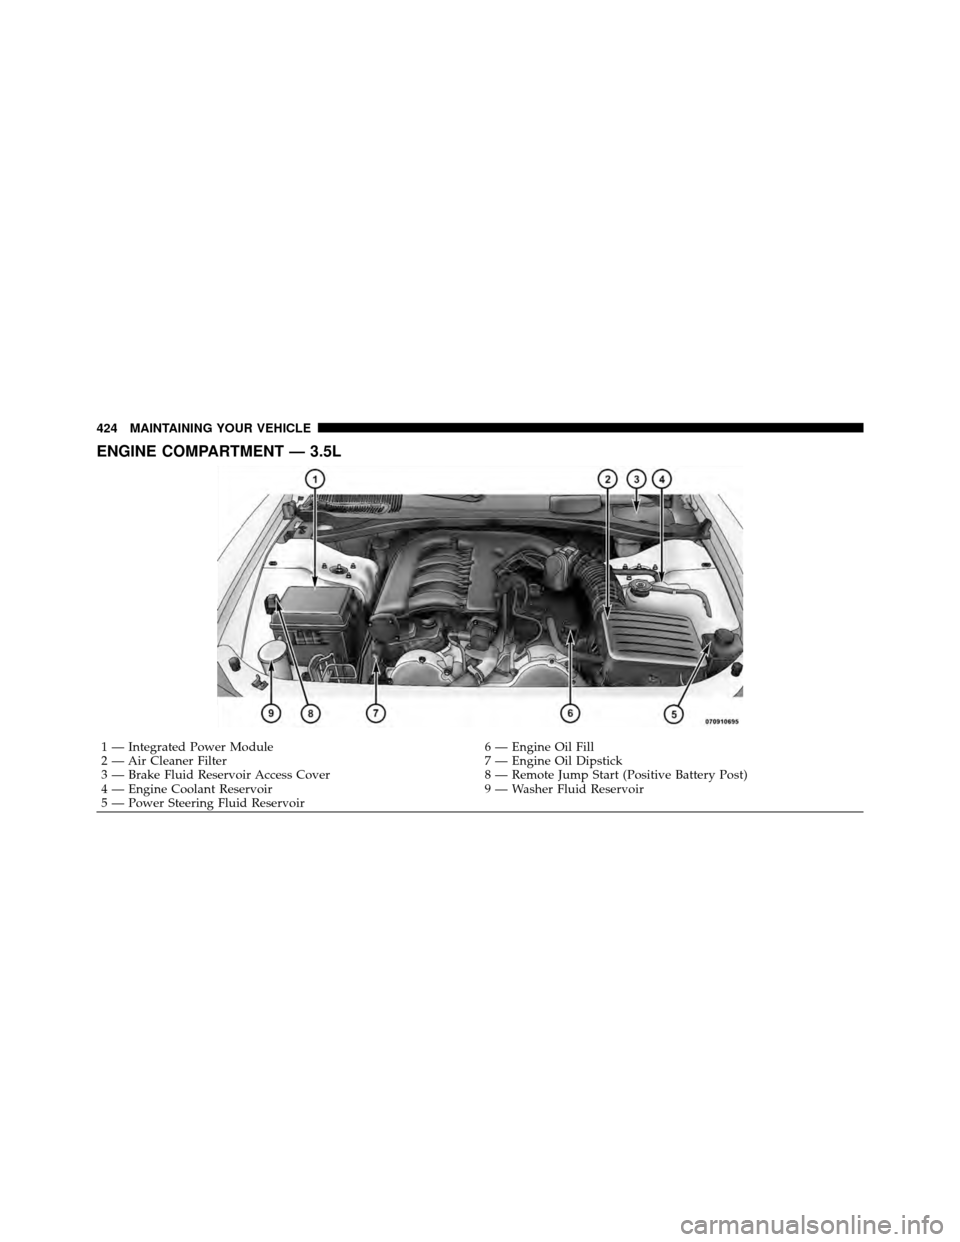 CHRYSLER 300 2010 1.G Owners Manual ENGINE COMPARTMENT — 3.5L
1 — Integrated Power Module6 — Engine Oil Fill
2 — Air Cleaner Filter 7 — Engine Oil Dipstick
3 — Brake Fluid Reservoir Access Cover 8 — Remote Jump Start (Posi